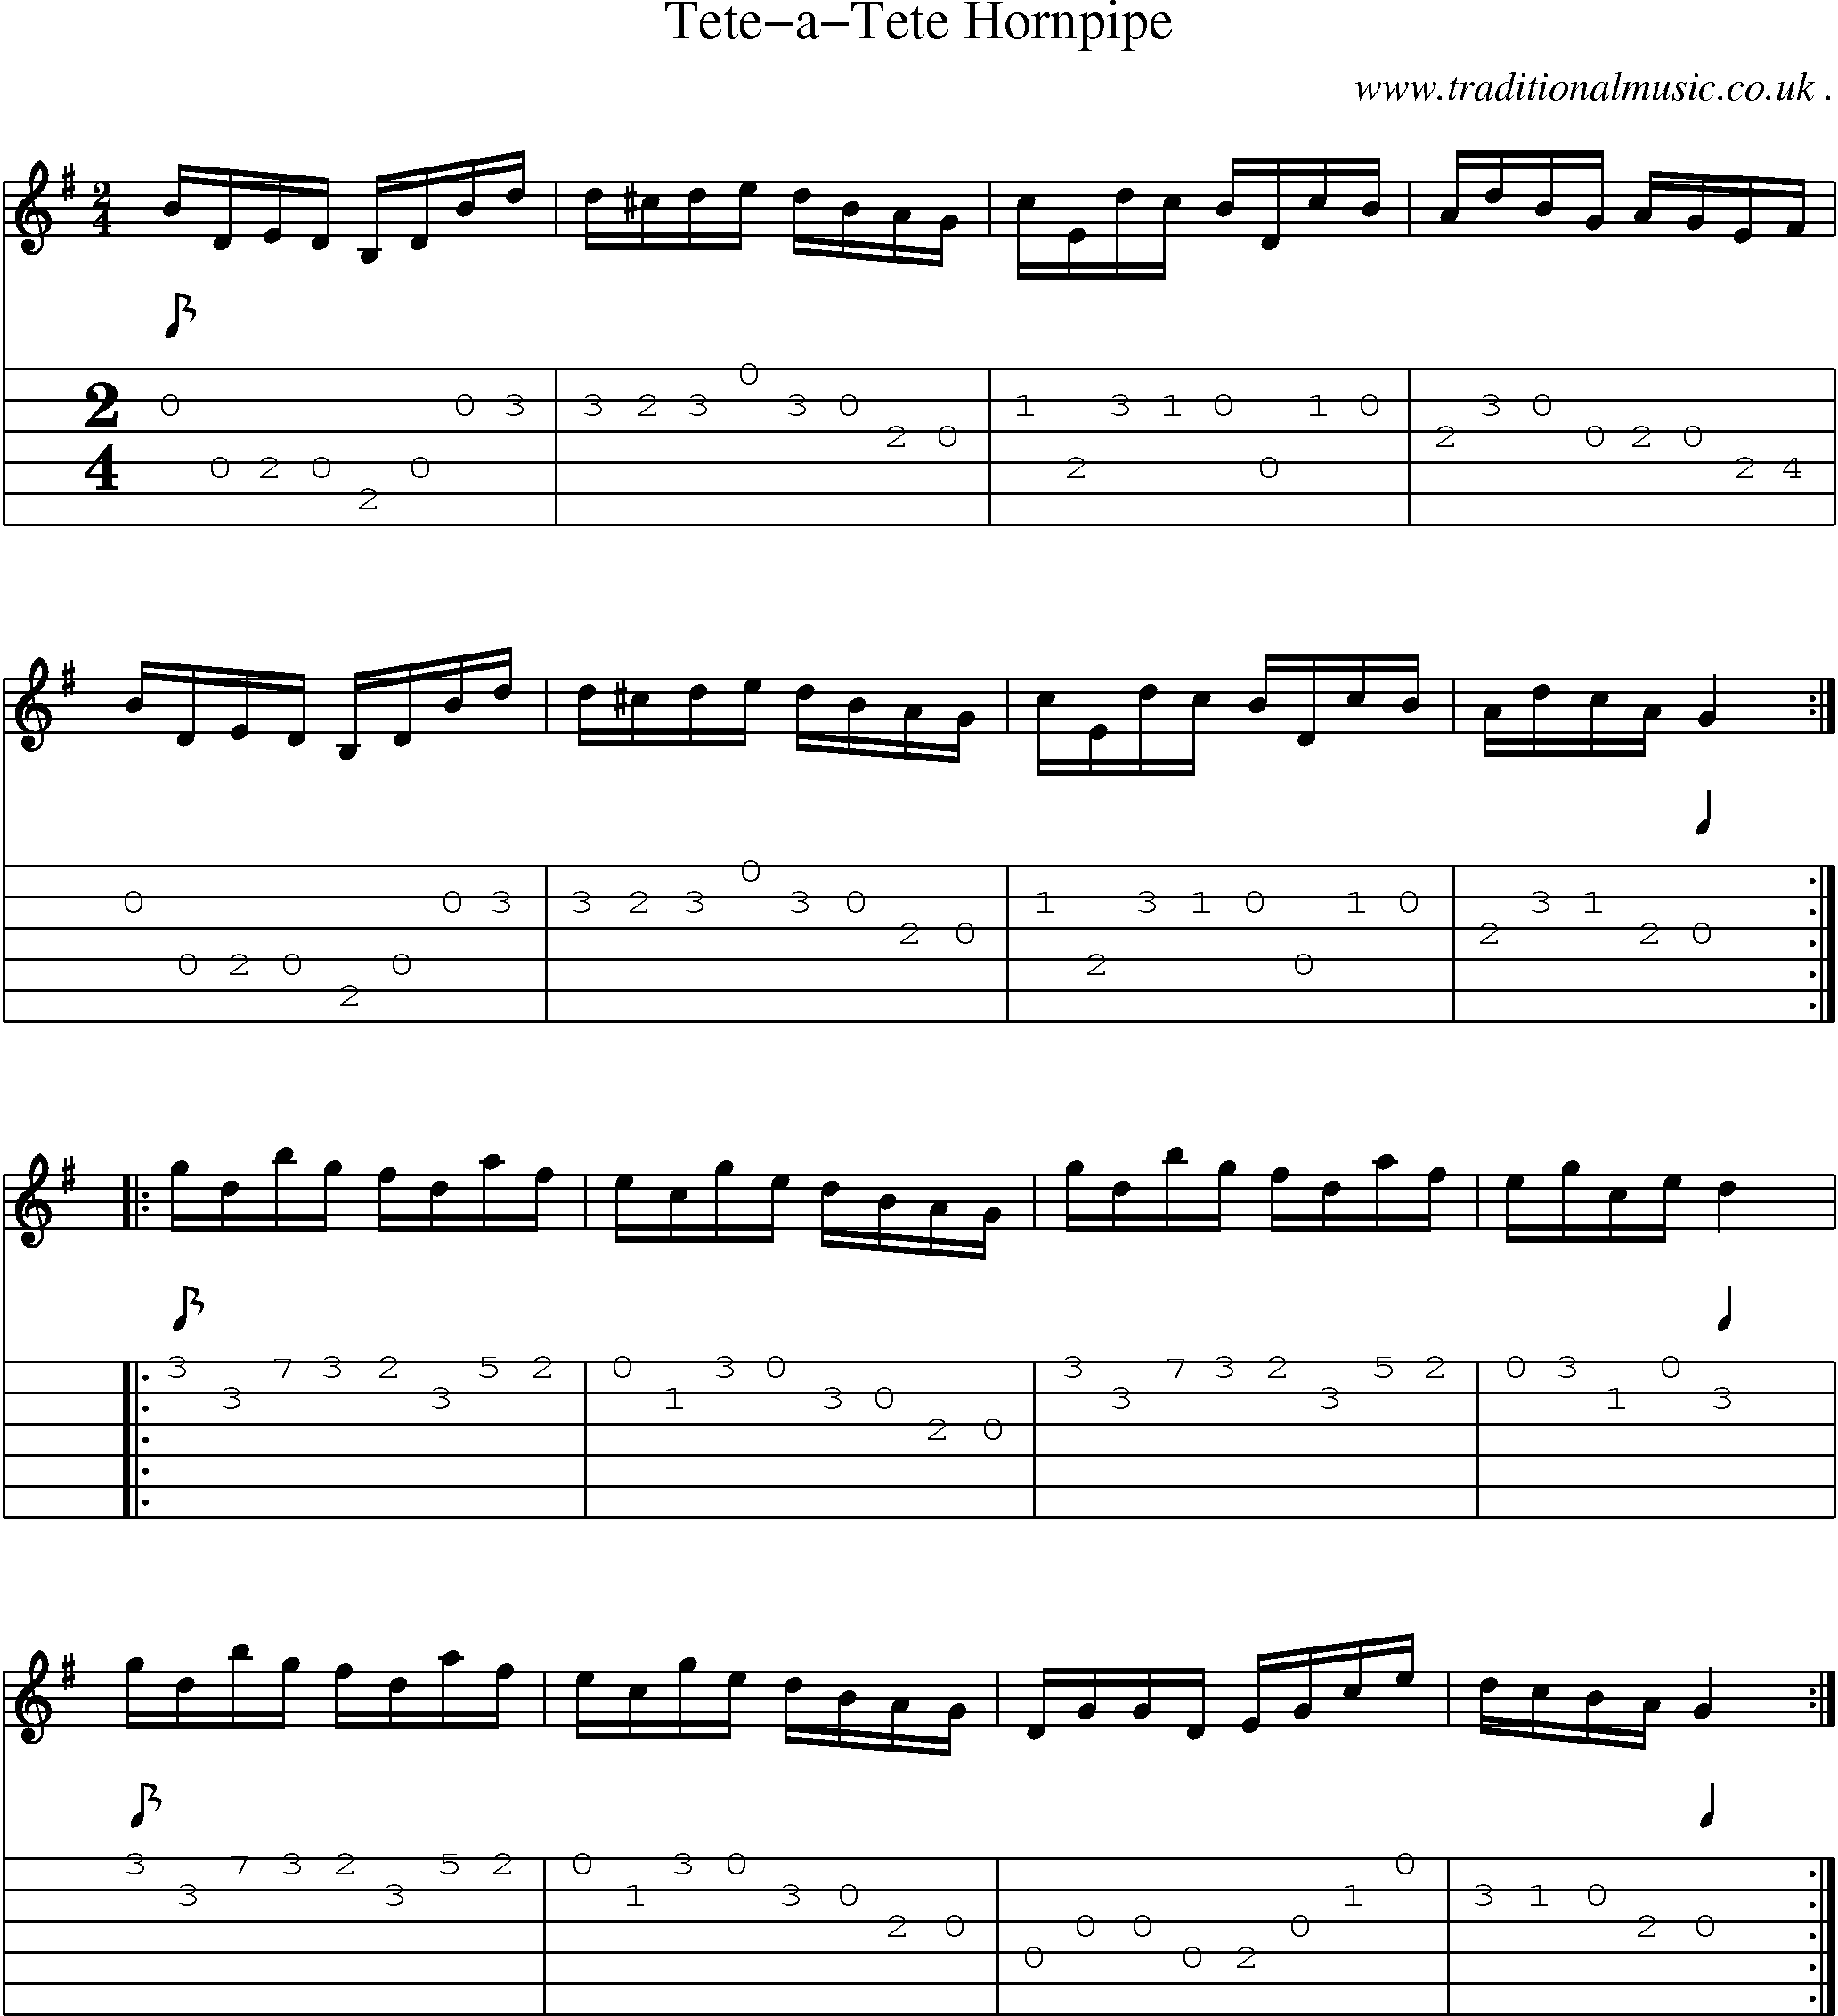 Sheet-Music and Guitar Tabs for Tete-a-tete Hornpipe